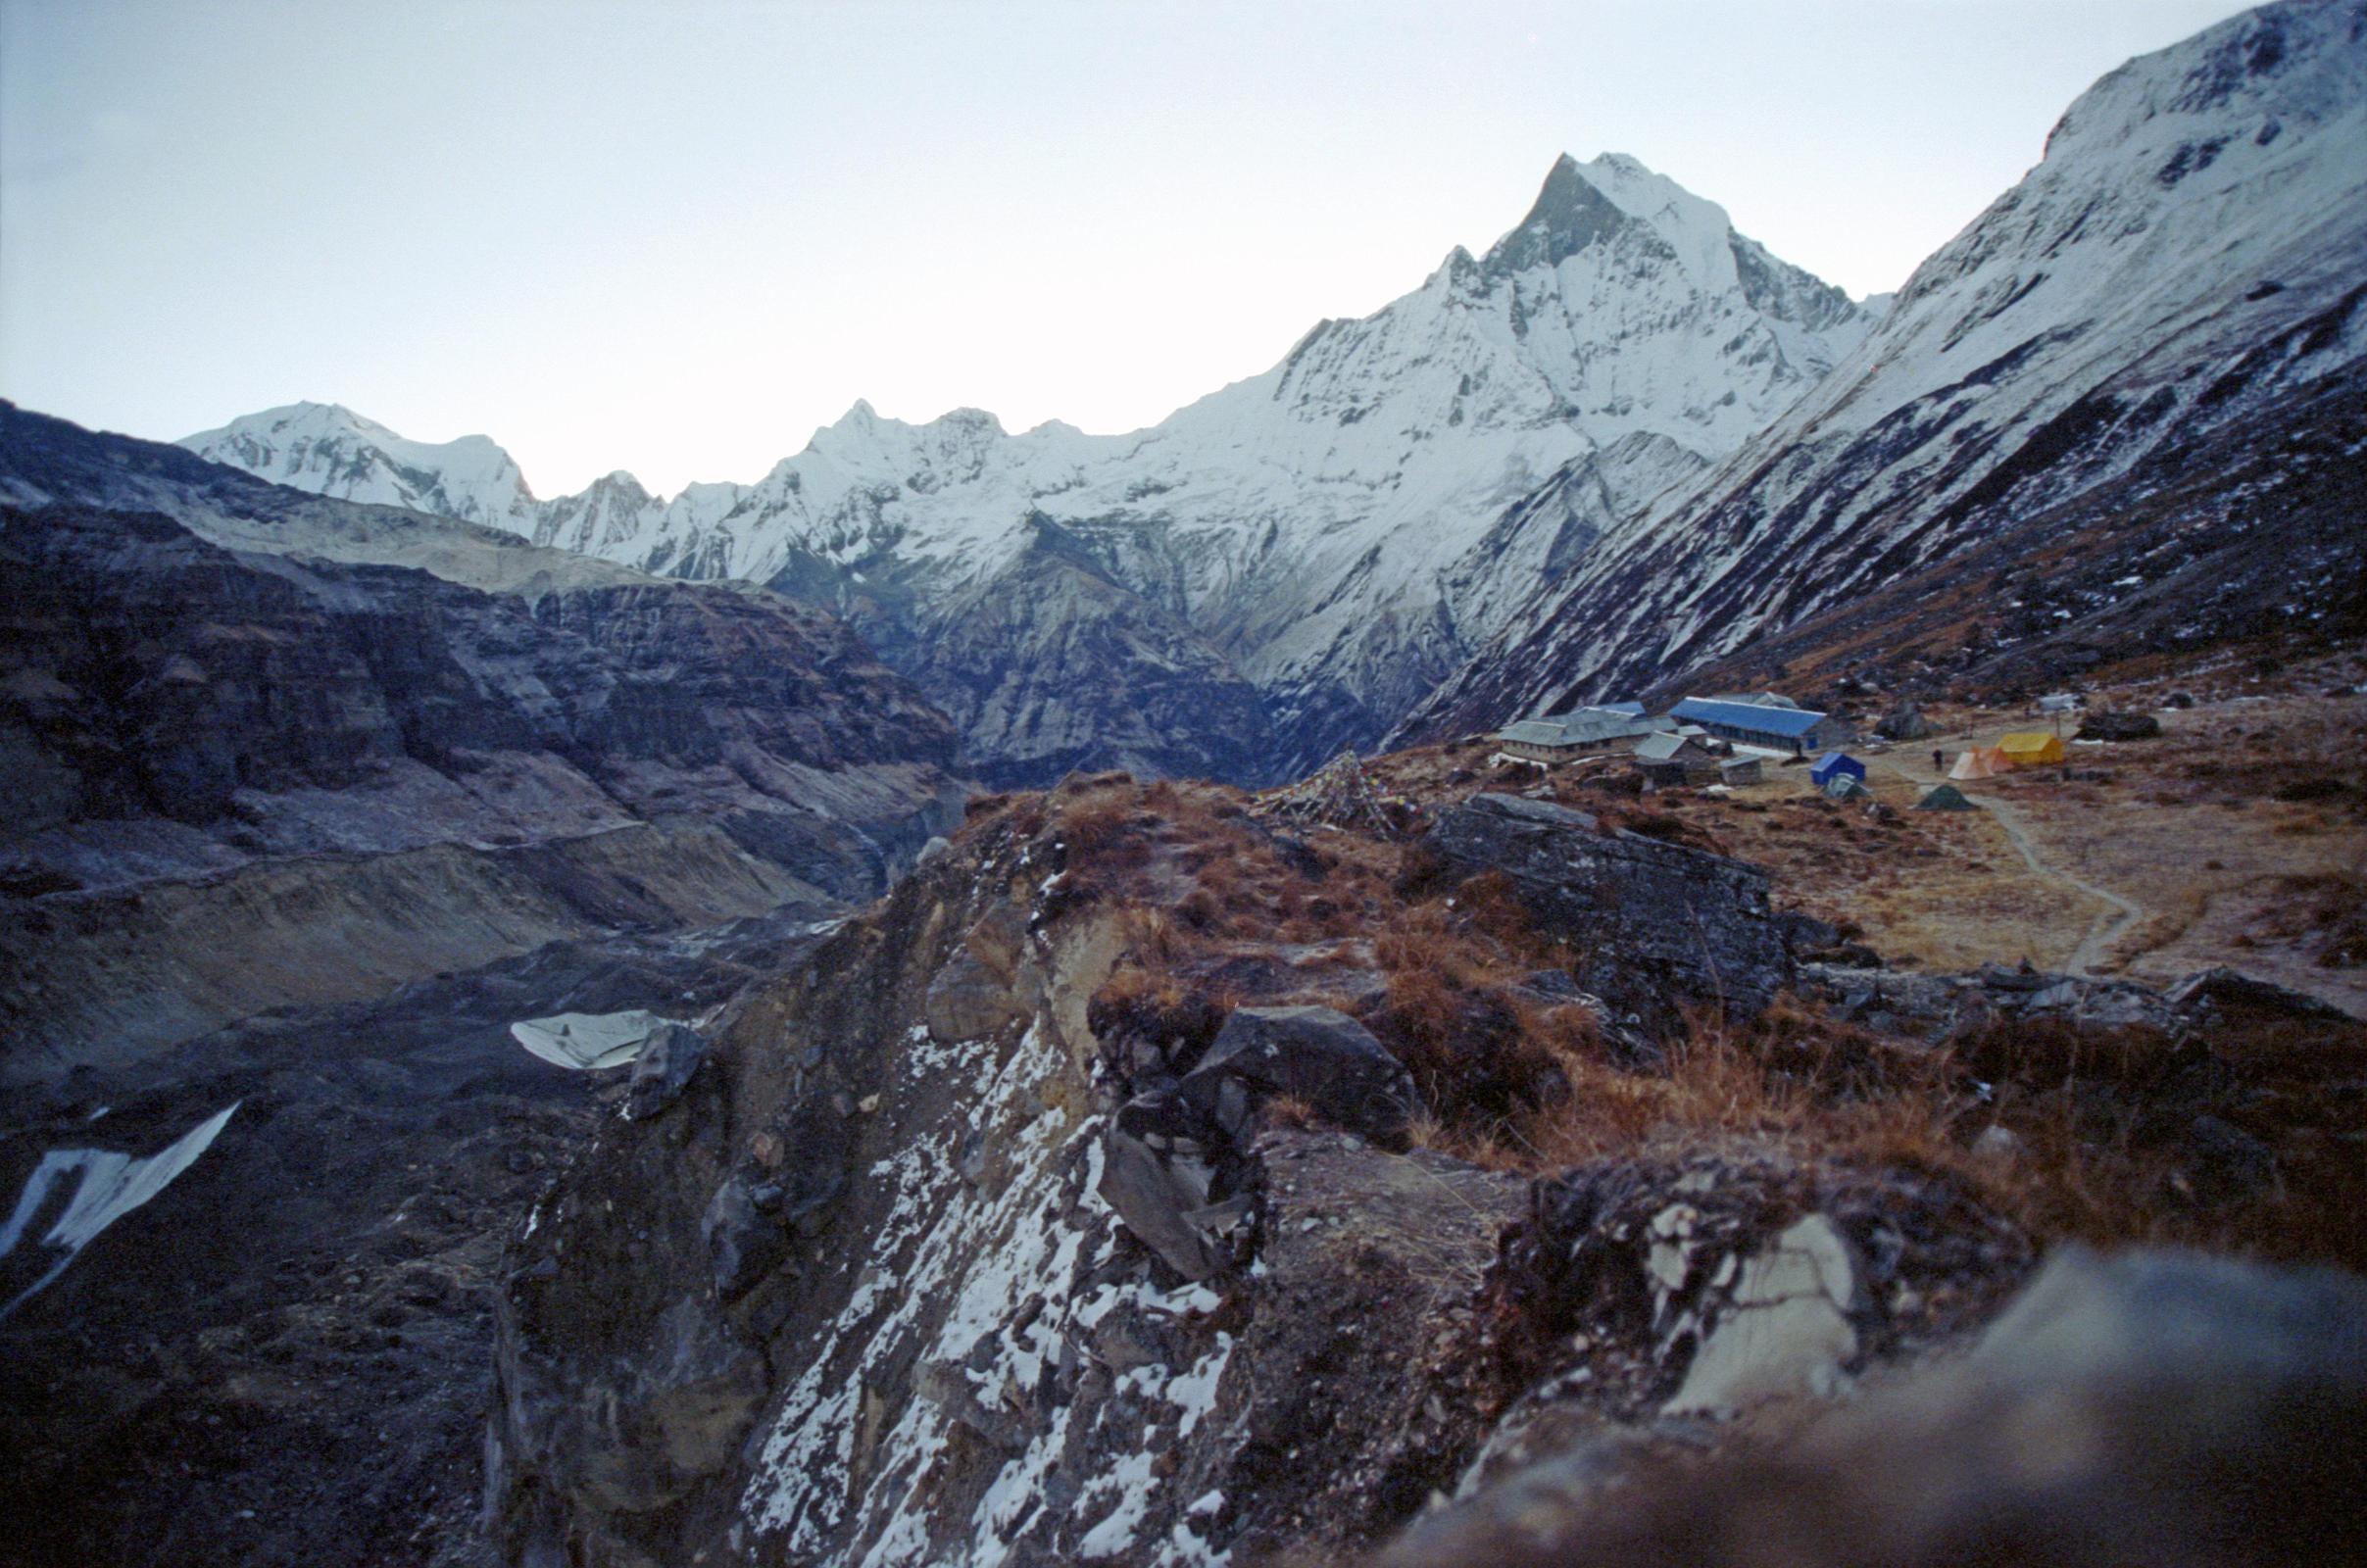 201 Annapurna Base Camp Before Sunrise - Annapurna III,  Gabelhorn, Machapuchare Annapurna Sanctuary Base Camp is a collection of stone huts surrounded by mountains and glaciers at around 4130m. This was the site of Chris Boningtons Base Camp for the 1970 British expedition that completed the first ascent of the Annapurna South Face. I was up early and walked in the -1C clear weather for ten minutes to the monument hill. Before the sun started rising, I looked back to the east of Annapurna Sanctuary Base Camp to see the ridge connecting Annapurna III (7555m) to Gandharva Chuli (Gabelhorn, 6248m) to Machapuchare (6993m).